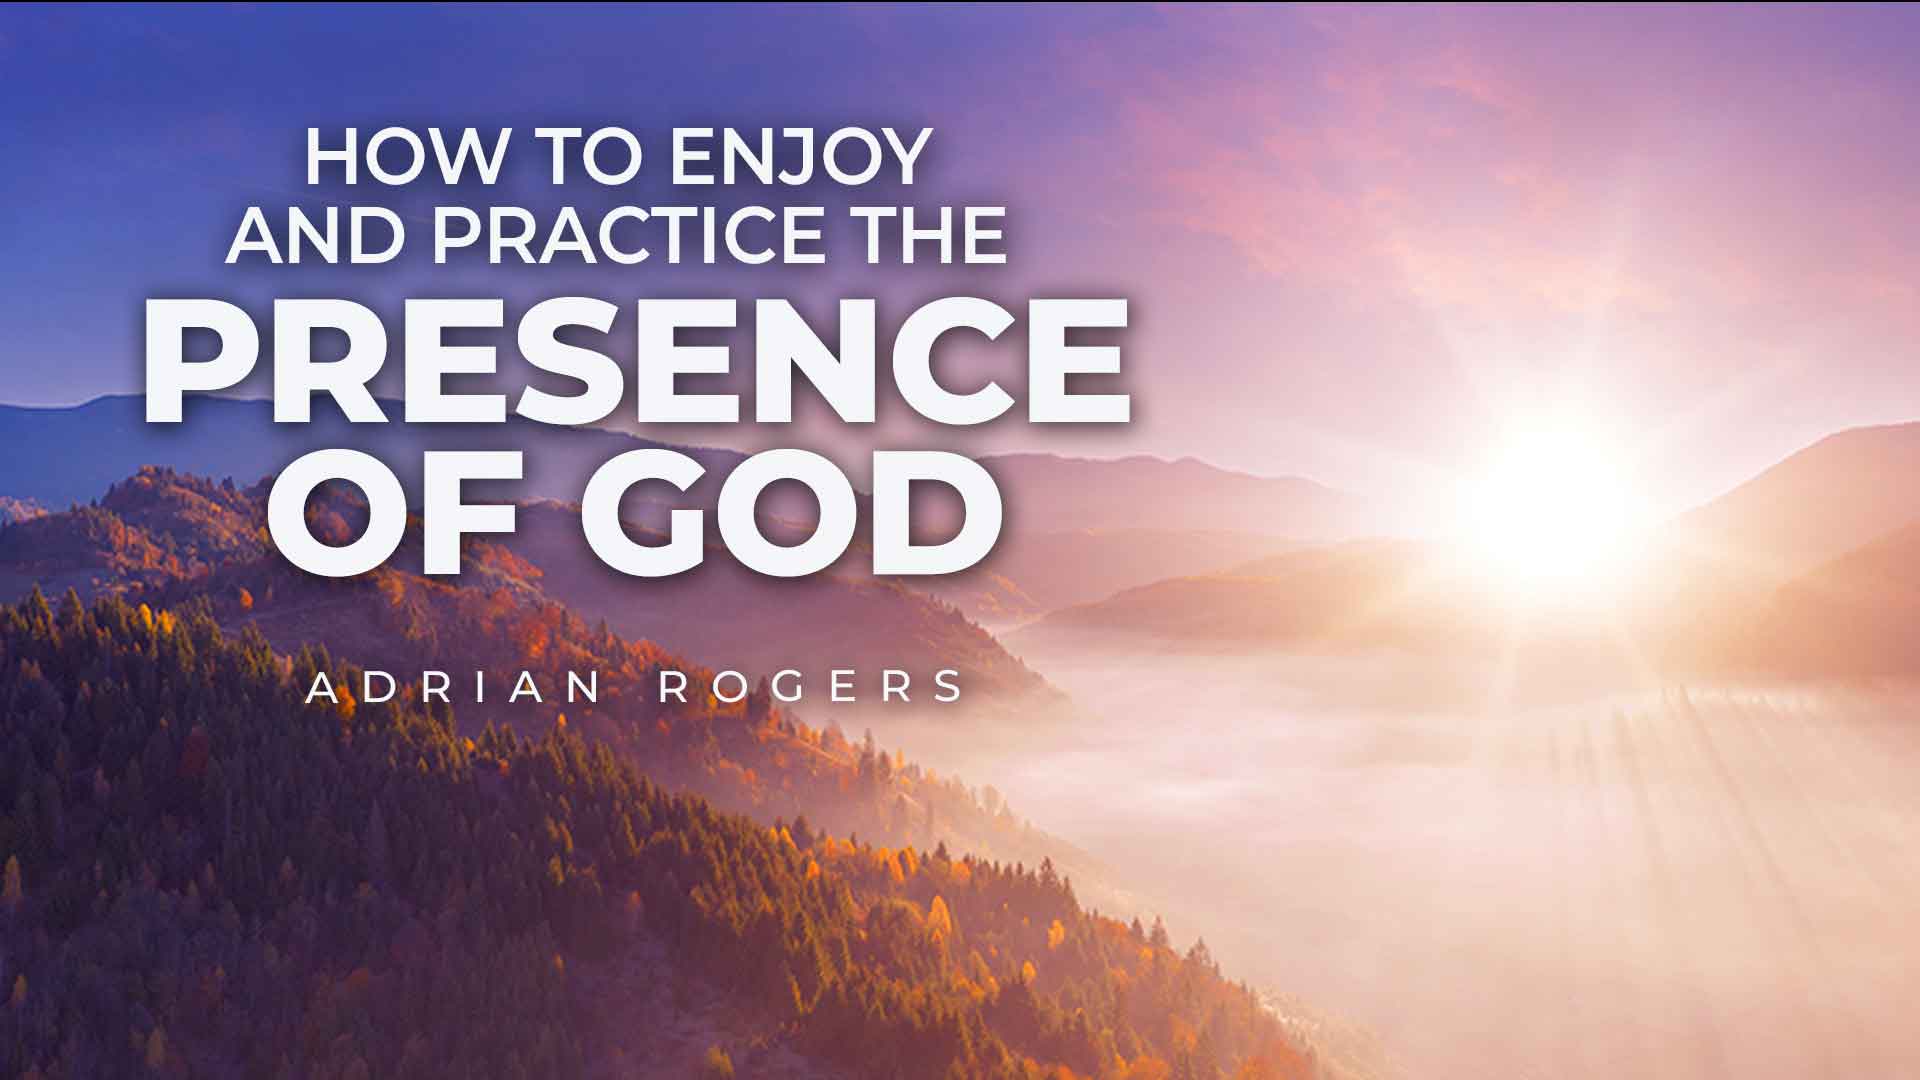 How to Enjoy and Practice the Presence of God 1920x1080